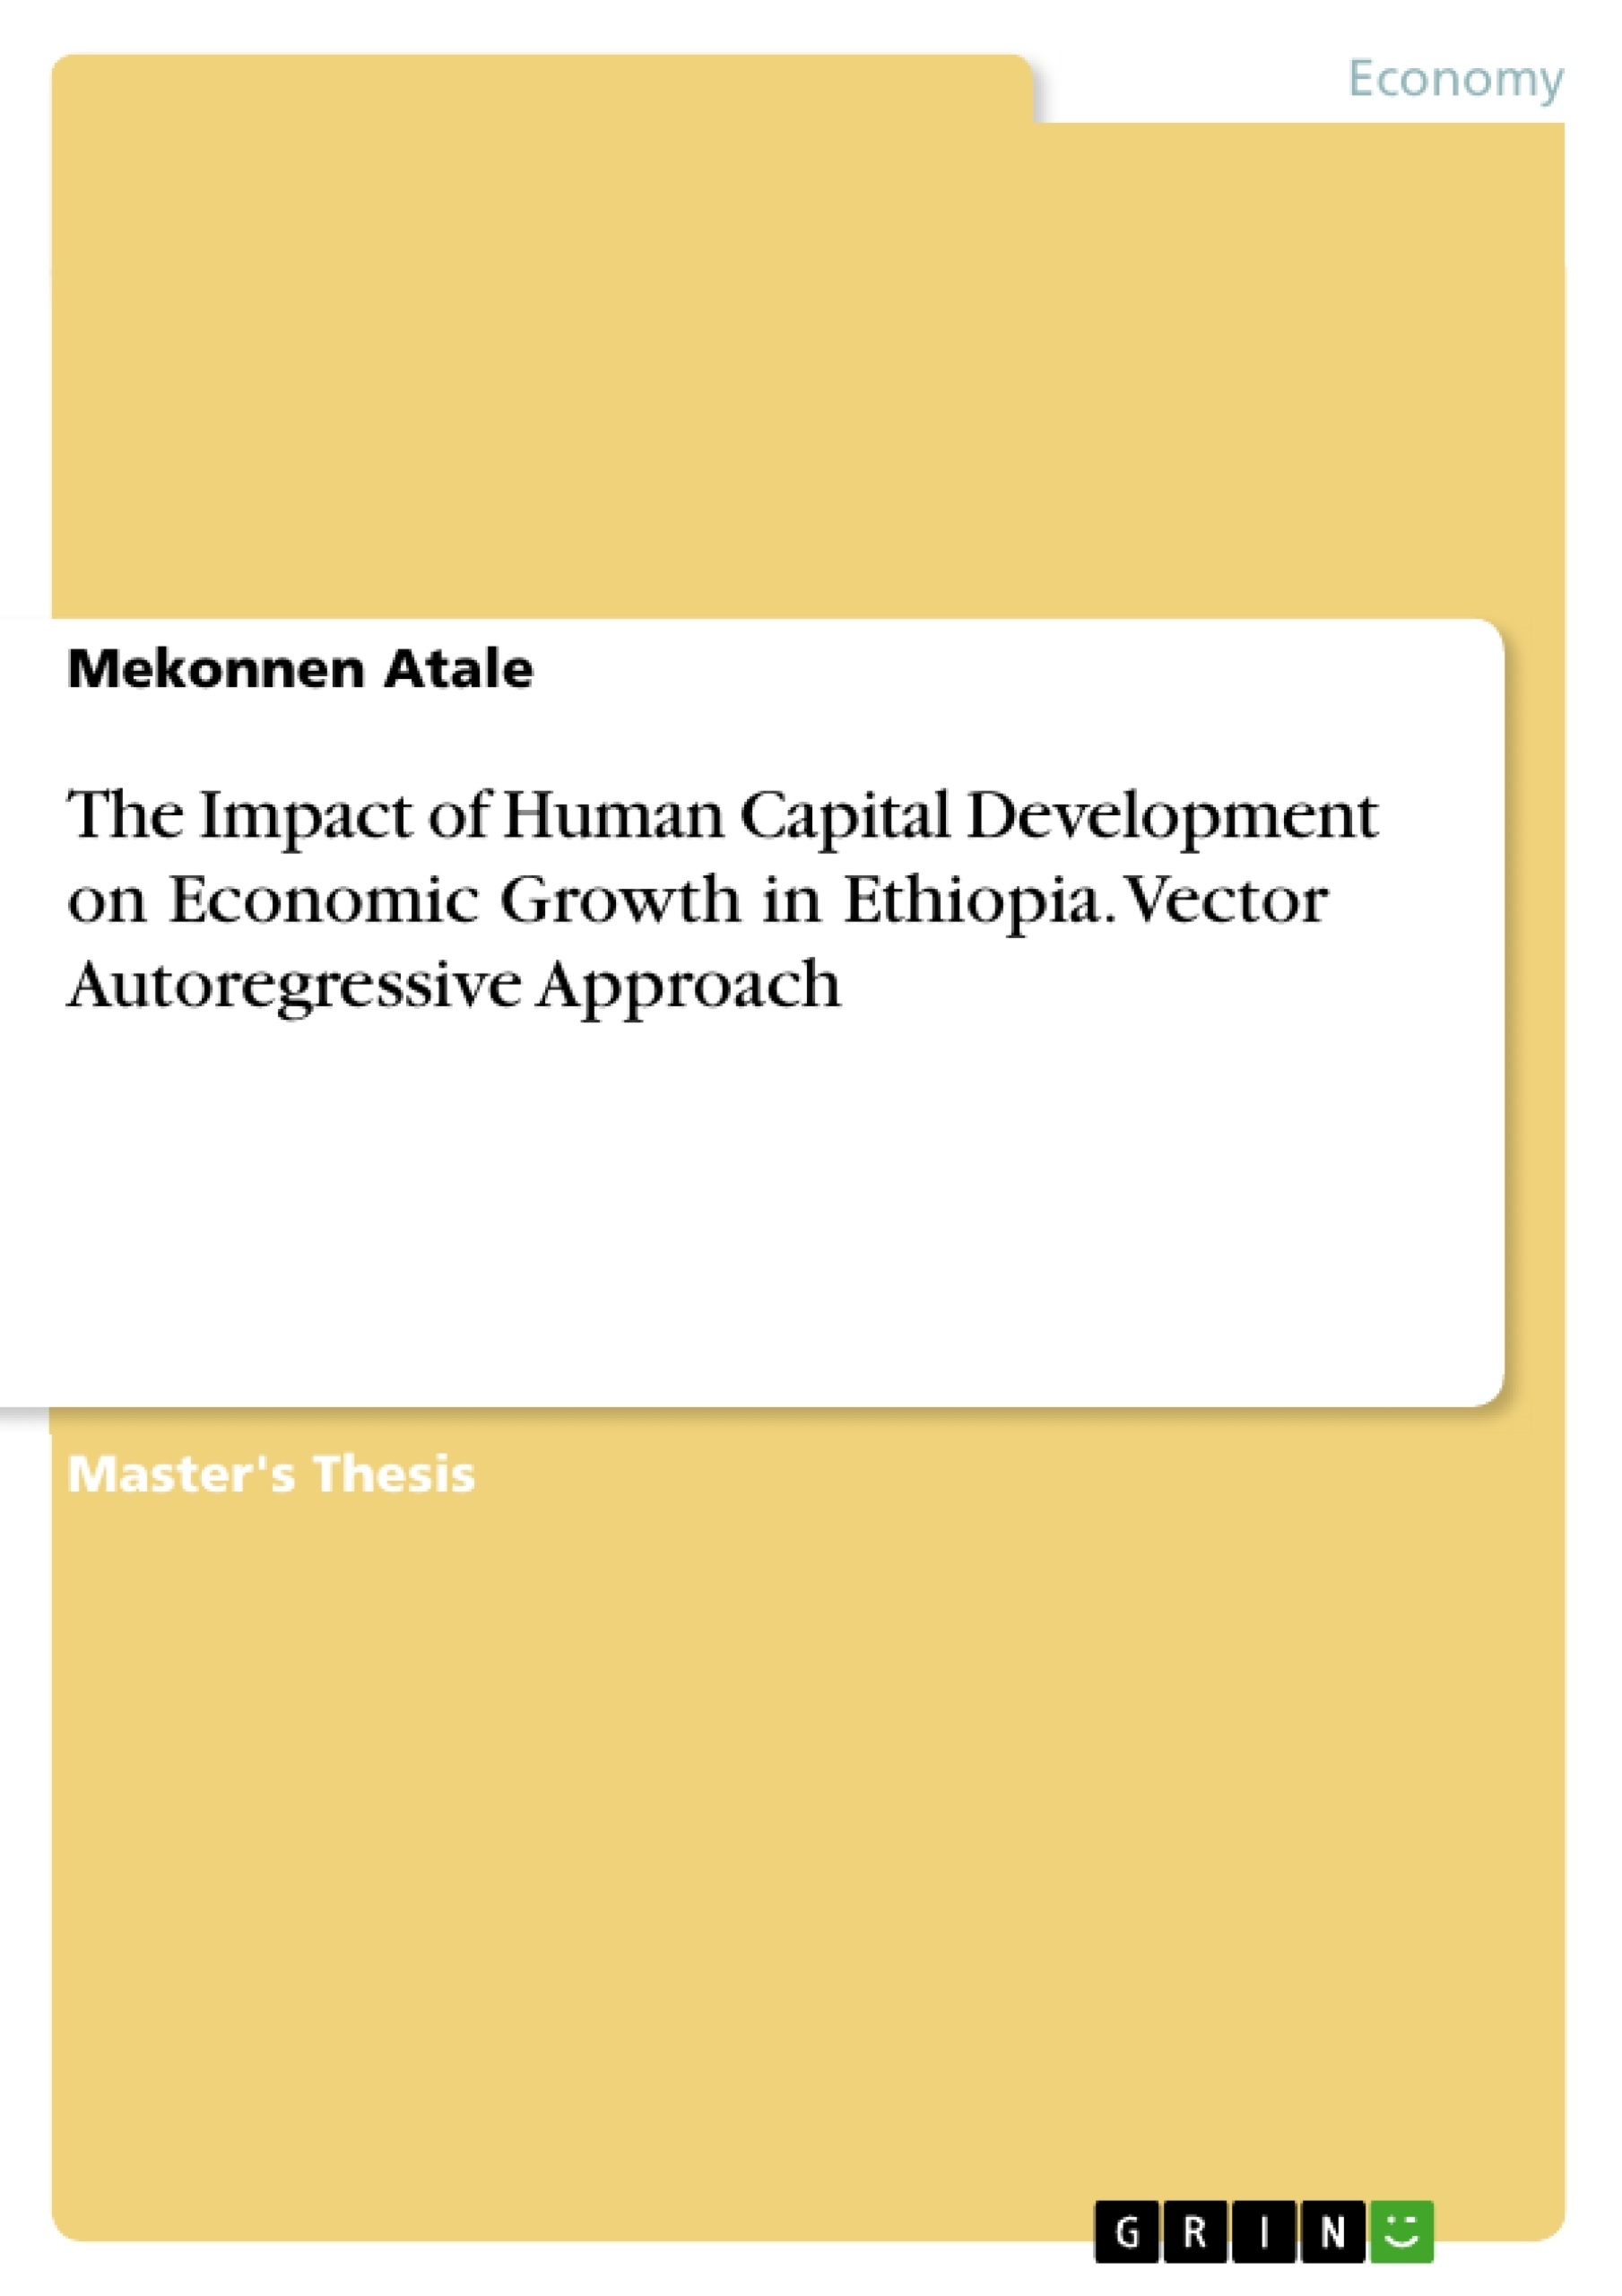 Title: The Impact of Human Capital Development on Economic Growth in Ethiopia. Vector Autoregressive Approach